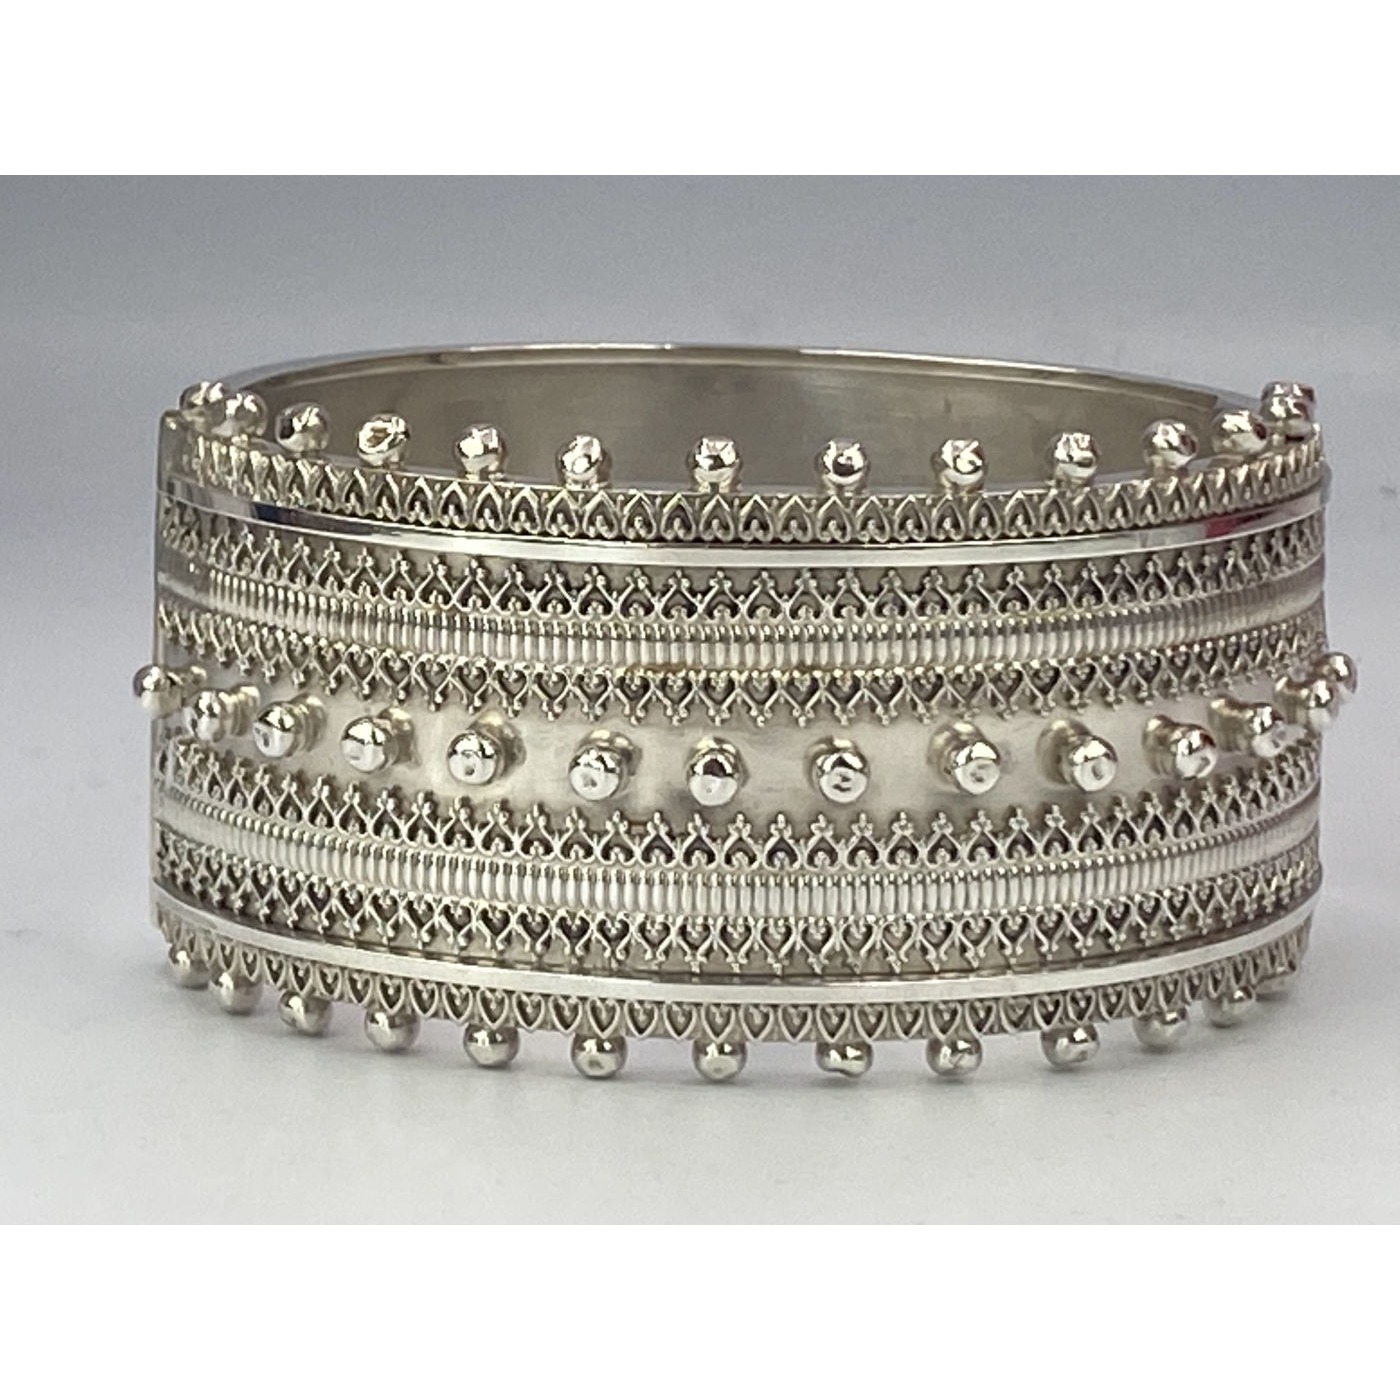 Larger English Silver Bangle with Beading and Wirework